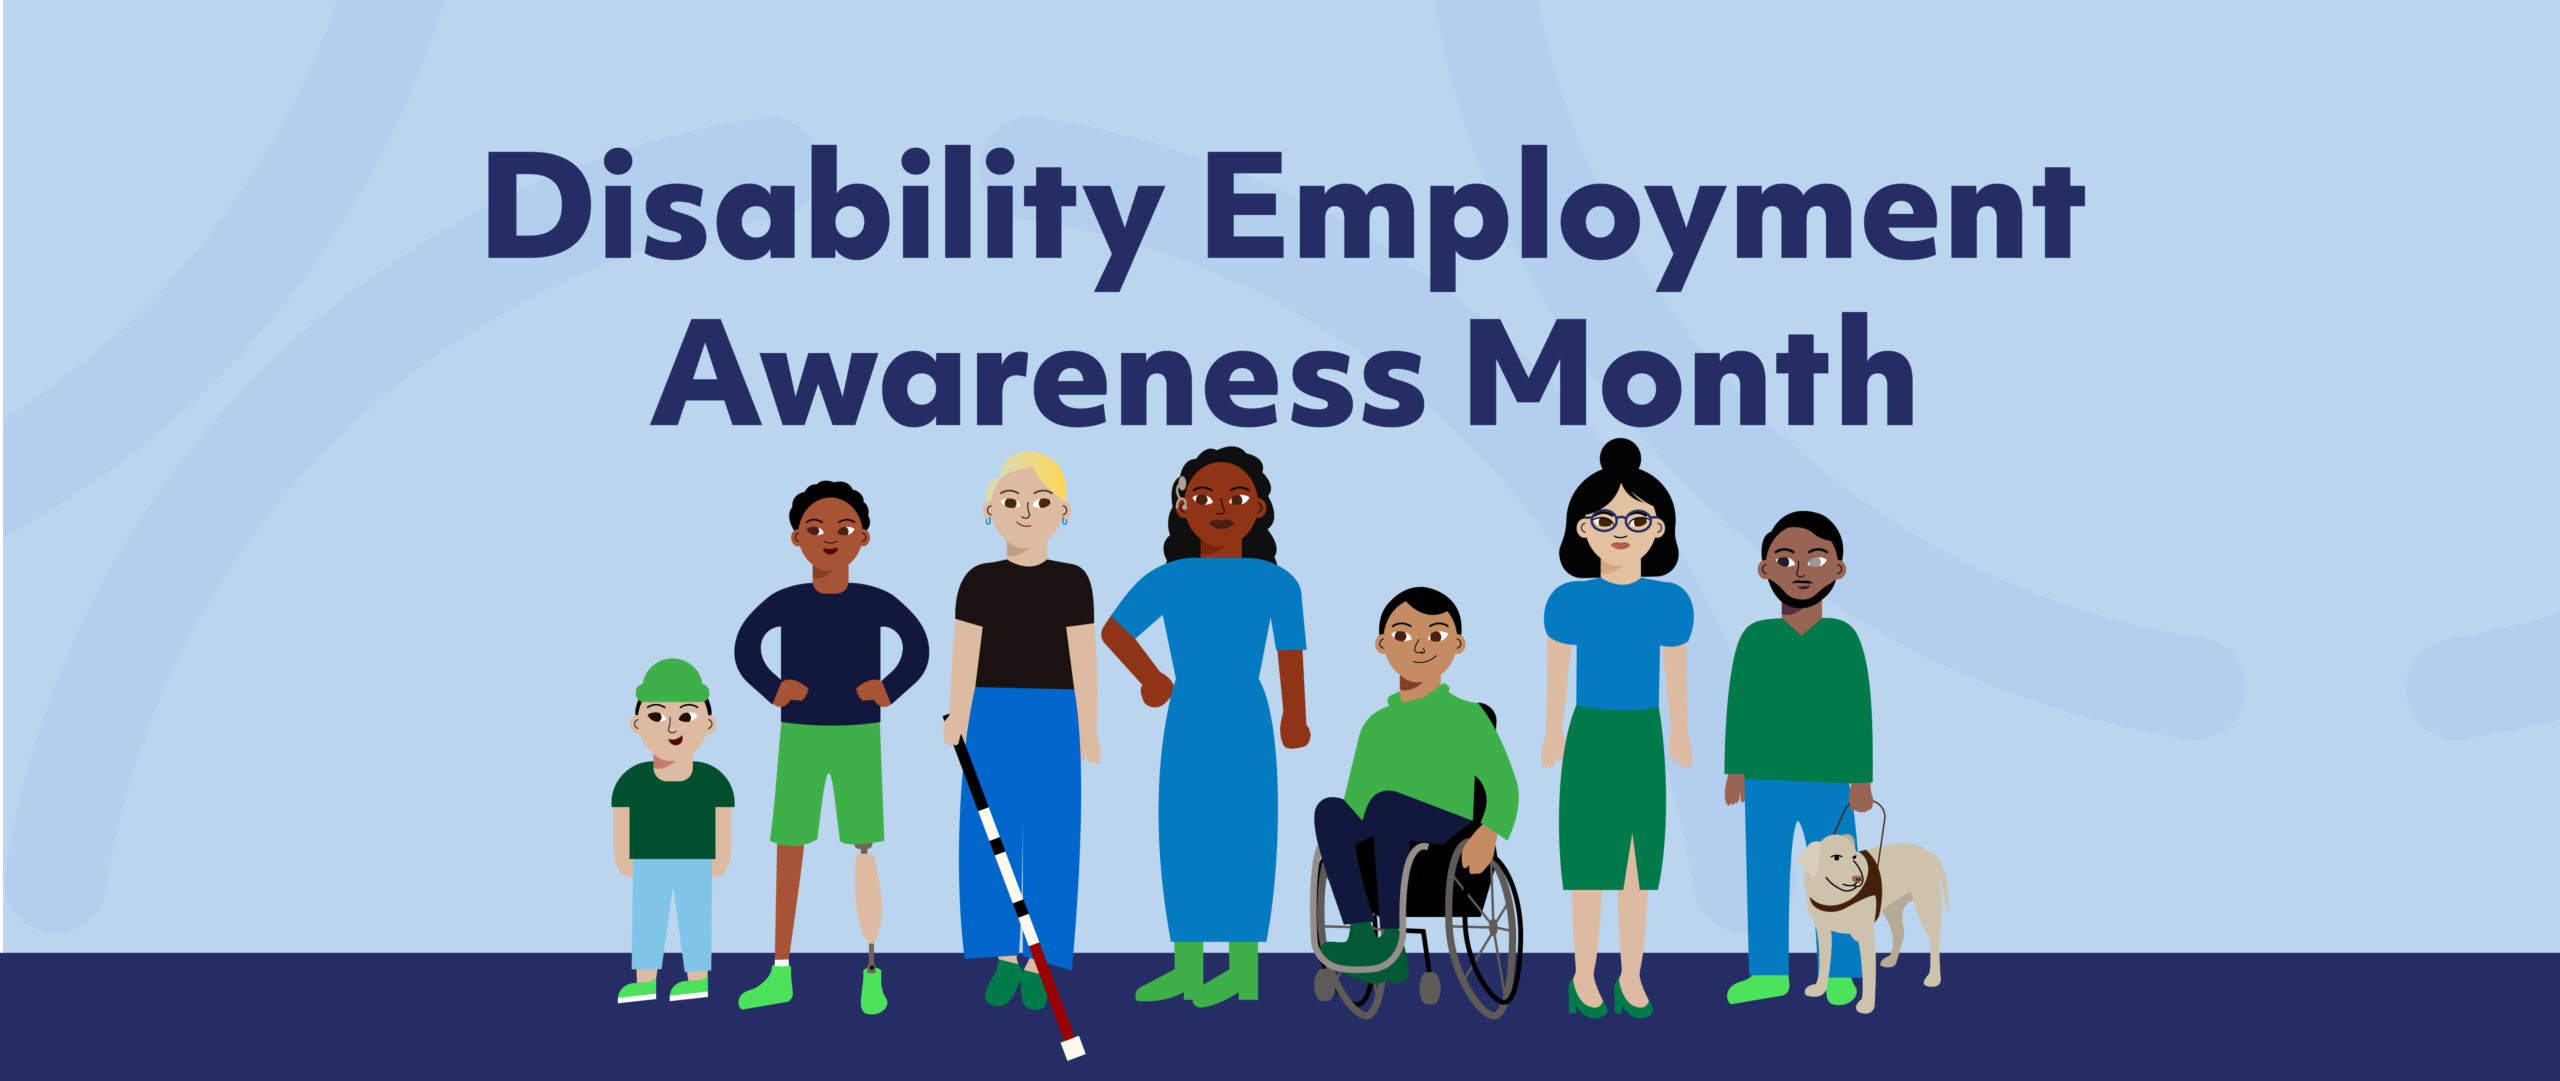 Celebrating Disability Employment, Inclusion, and the Future of Work